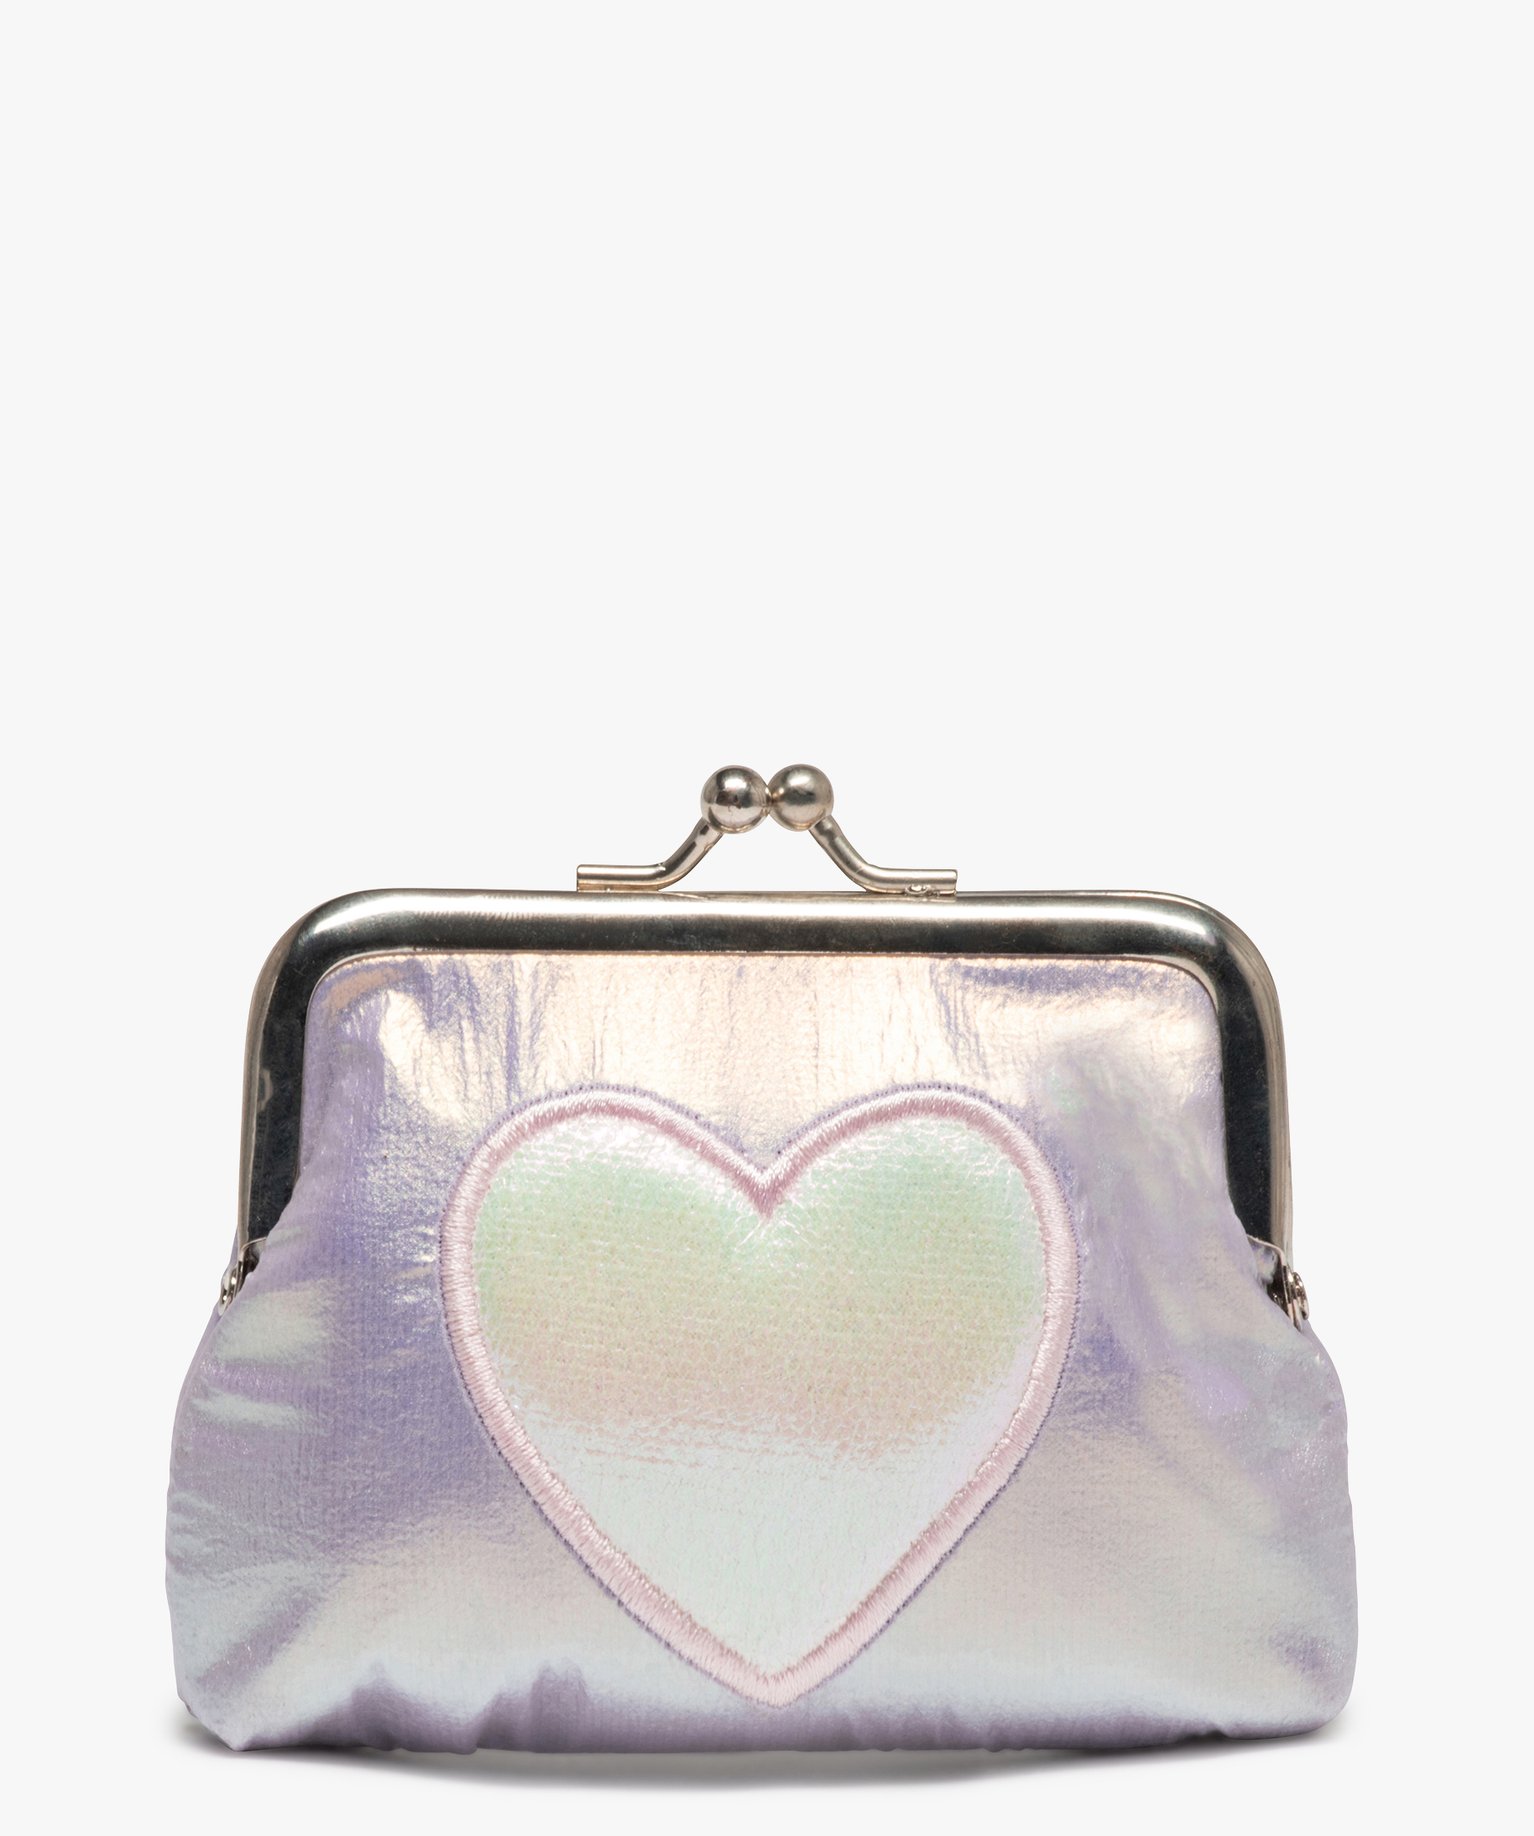 porte-monnaie fille iridescent a cour brode rose